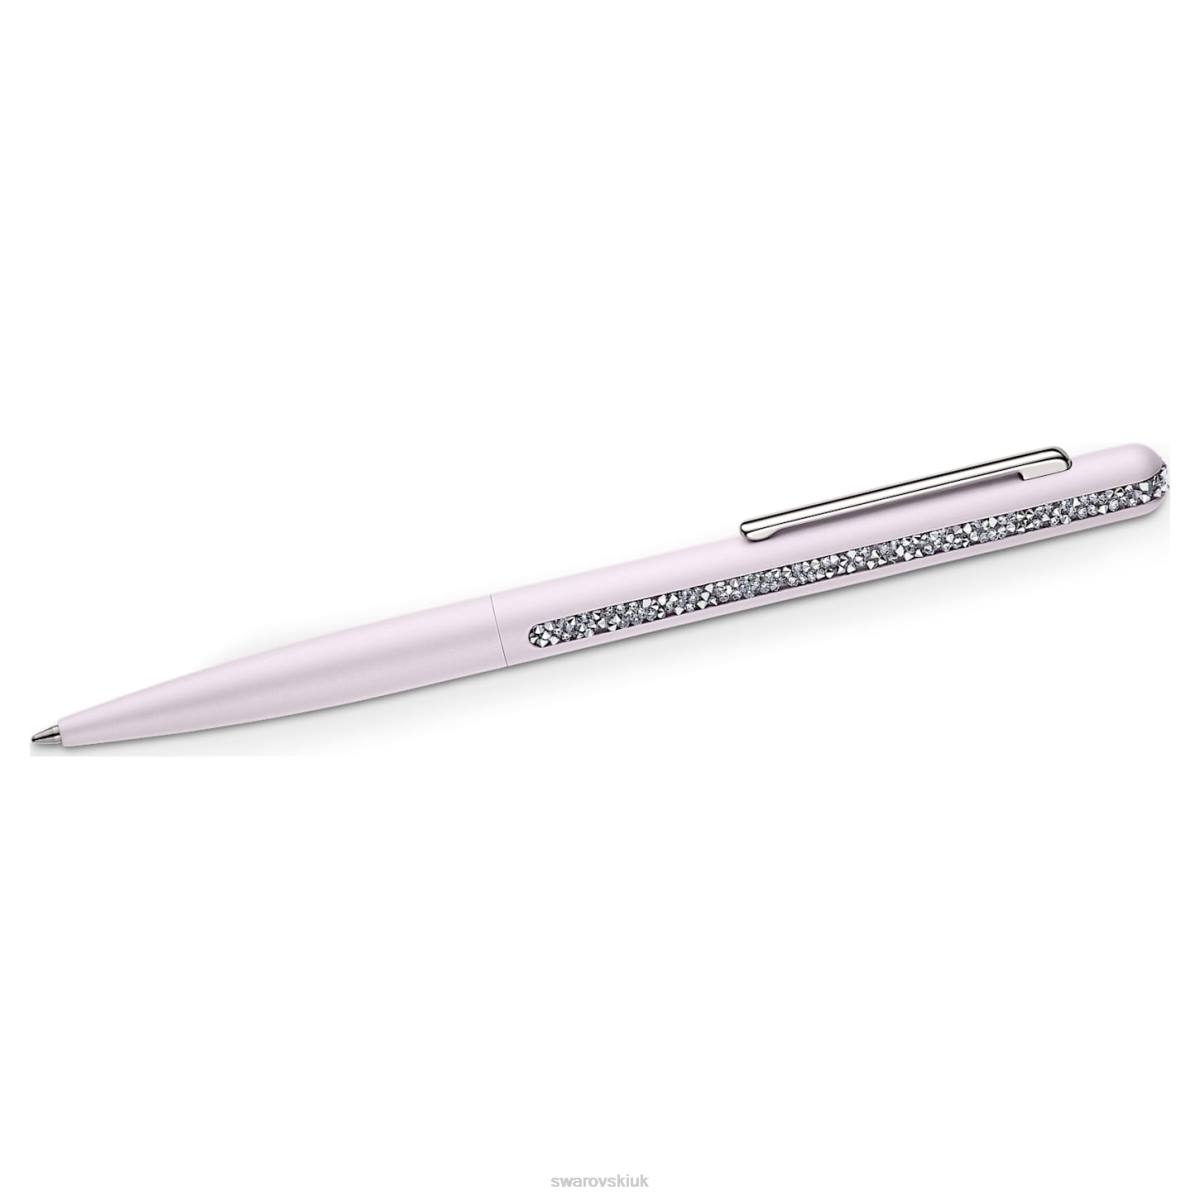 Accessories Swarovski Crystal Shimmer ballpoint pen Pink, Pink lacquered, Chrome plated 48JX1265